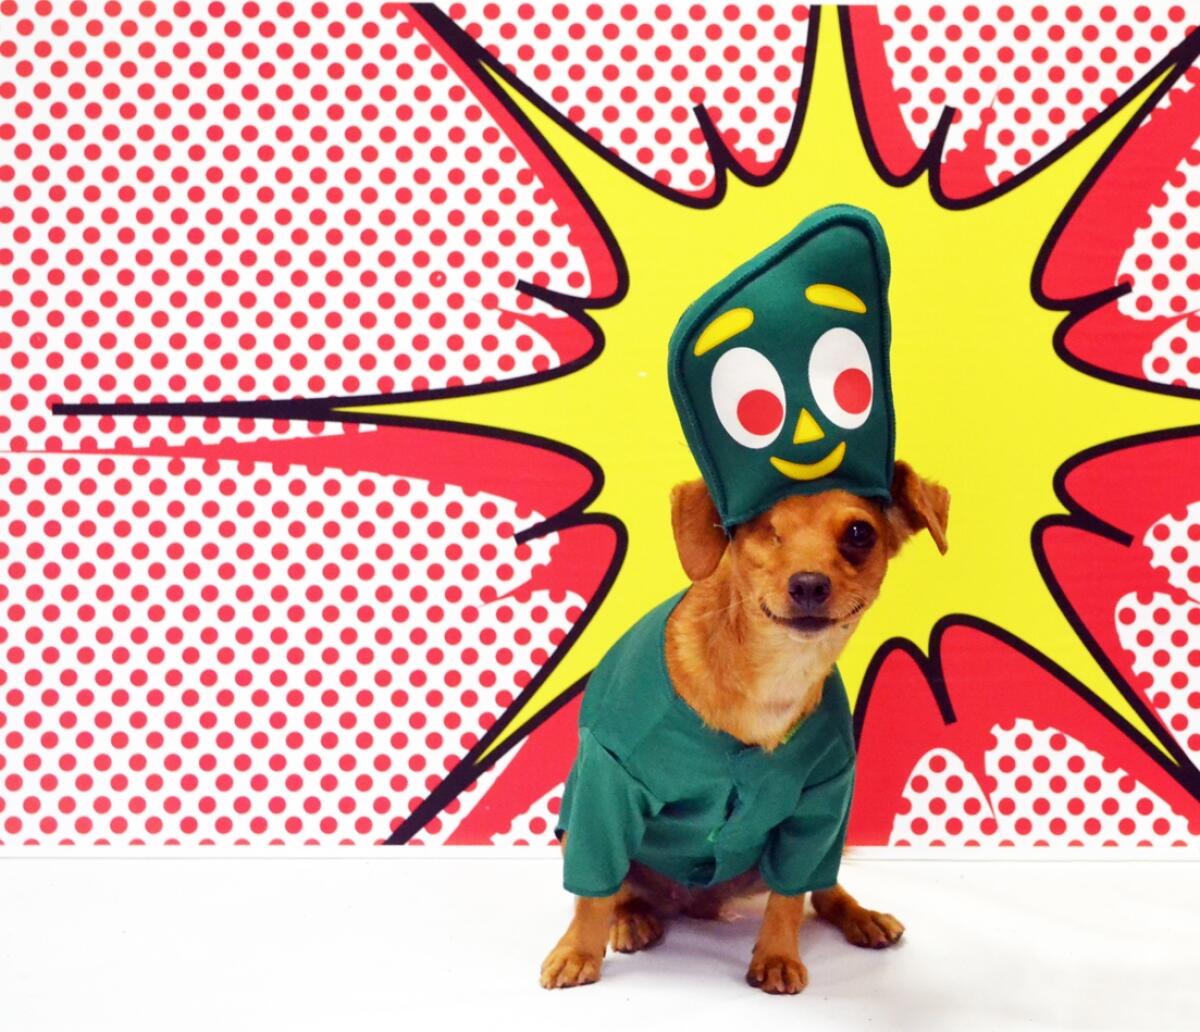 A dog dressed up as Gumby.